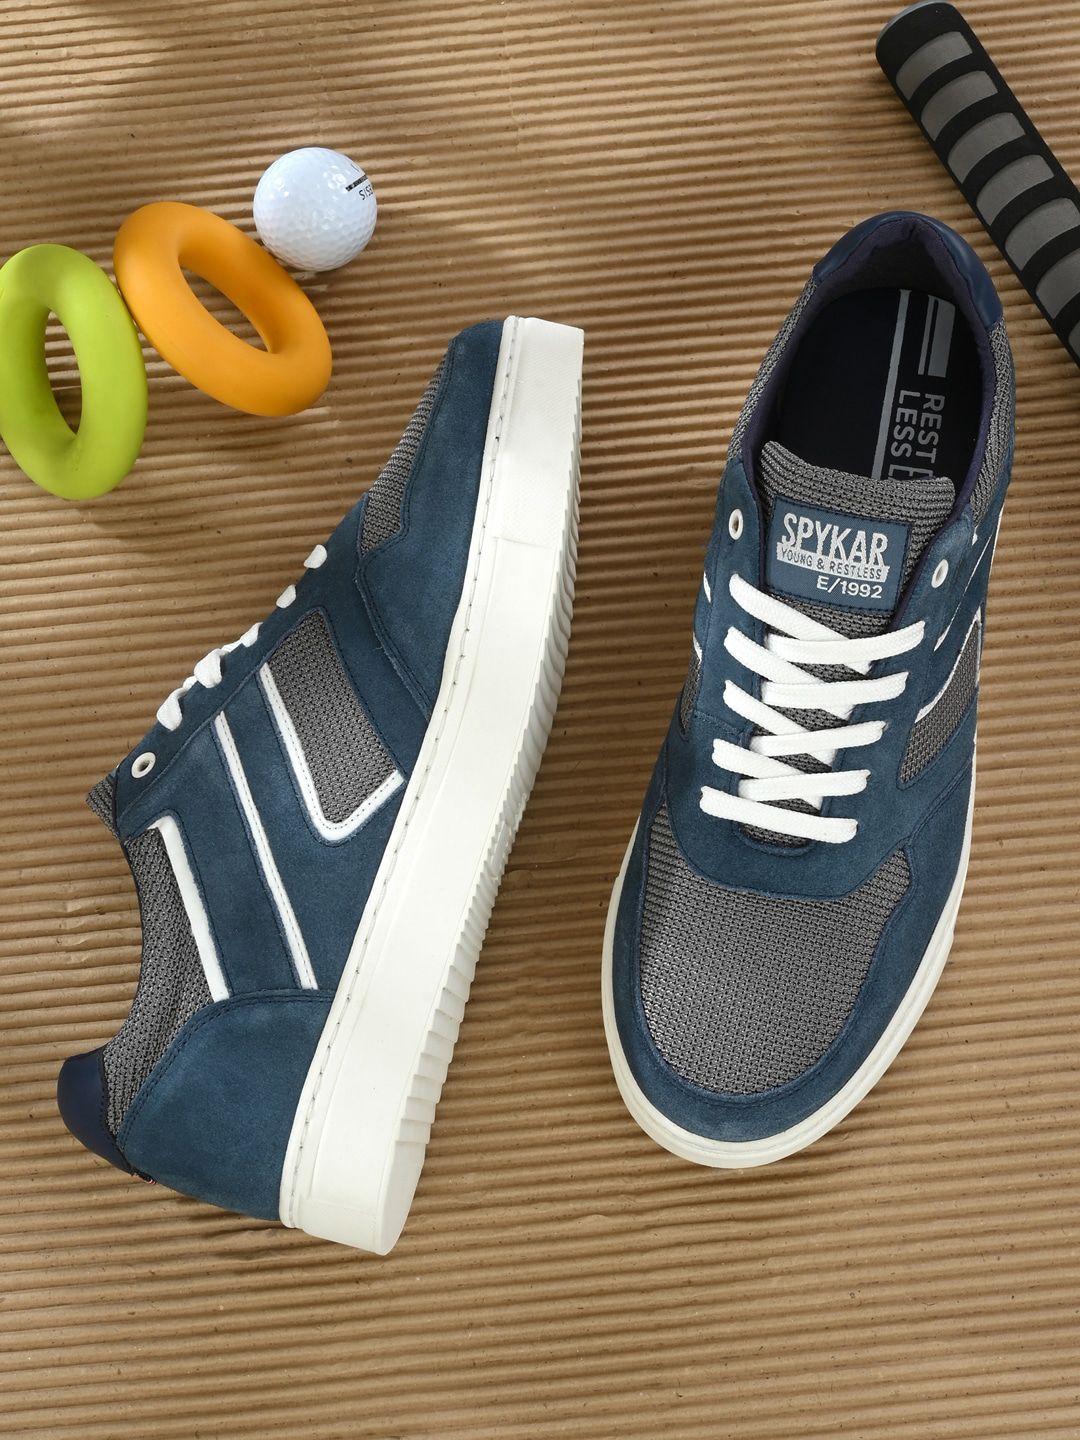 spykar men textured lace up sneakers